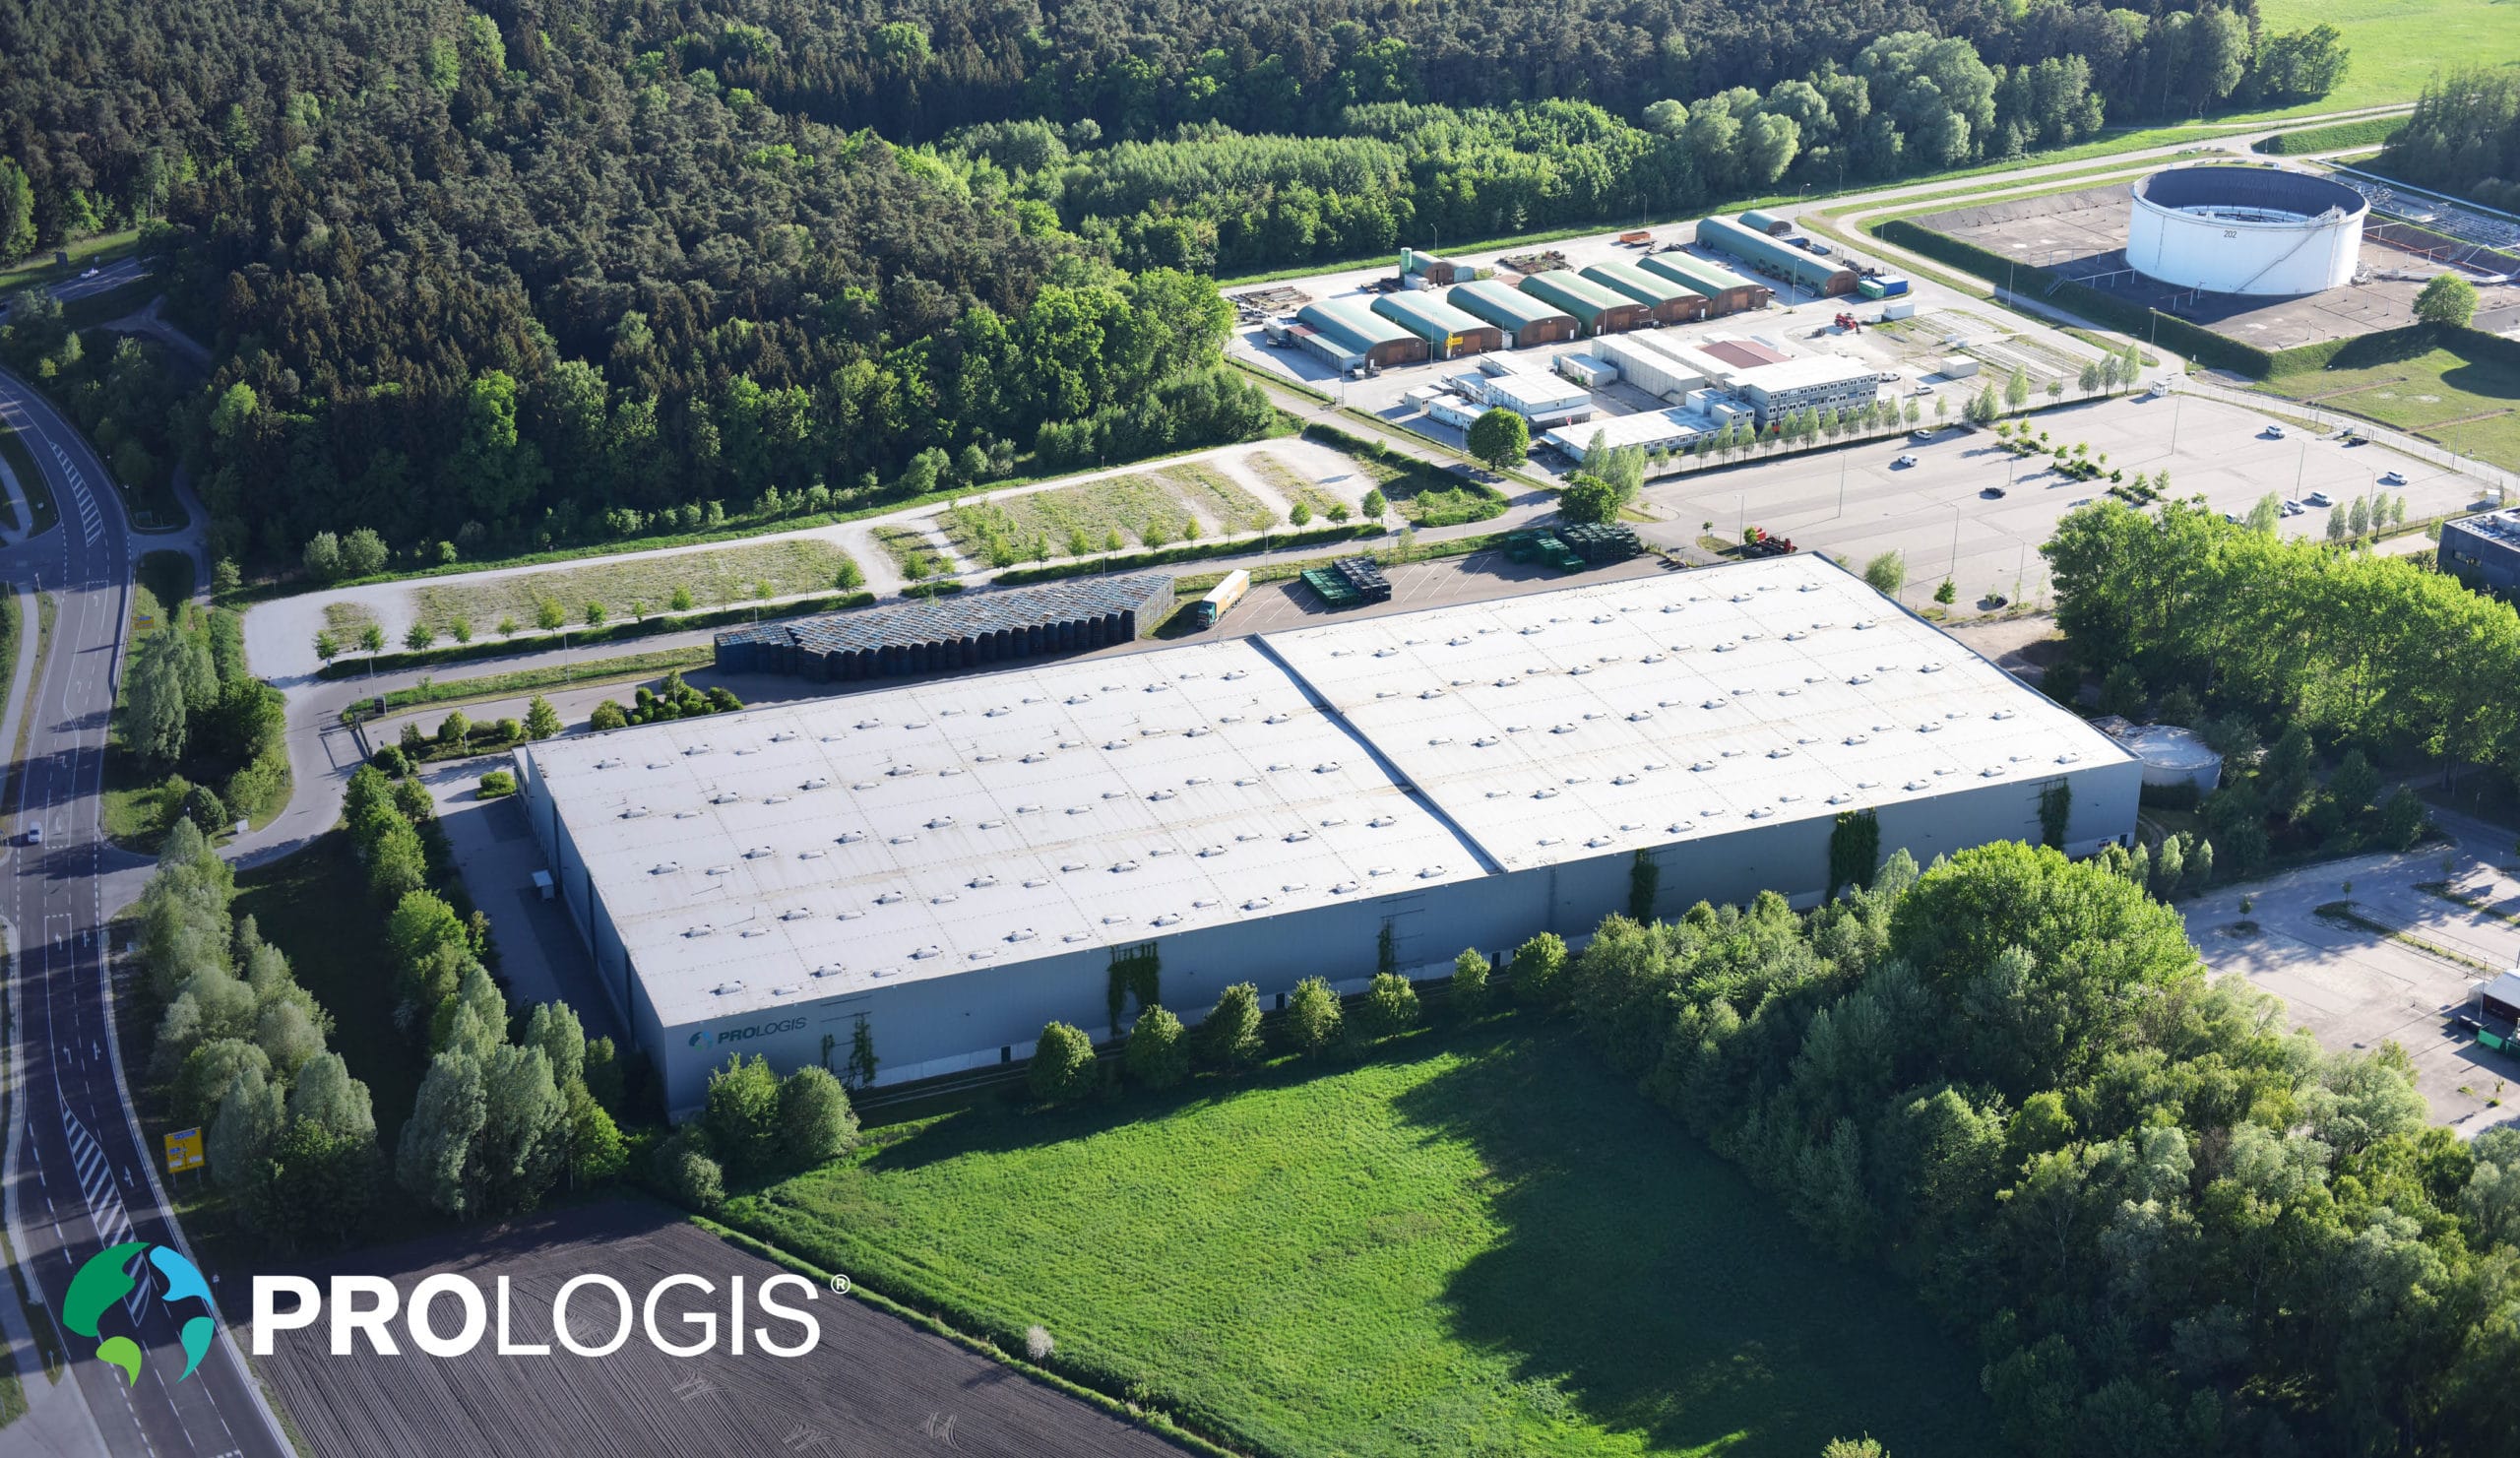 Prologis Sustainablity Report